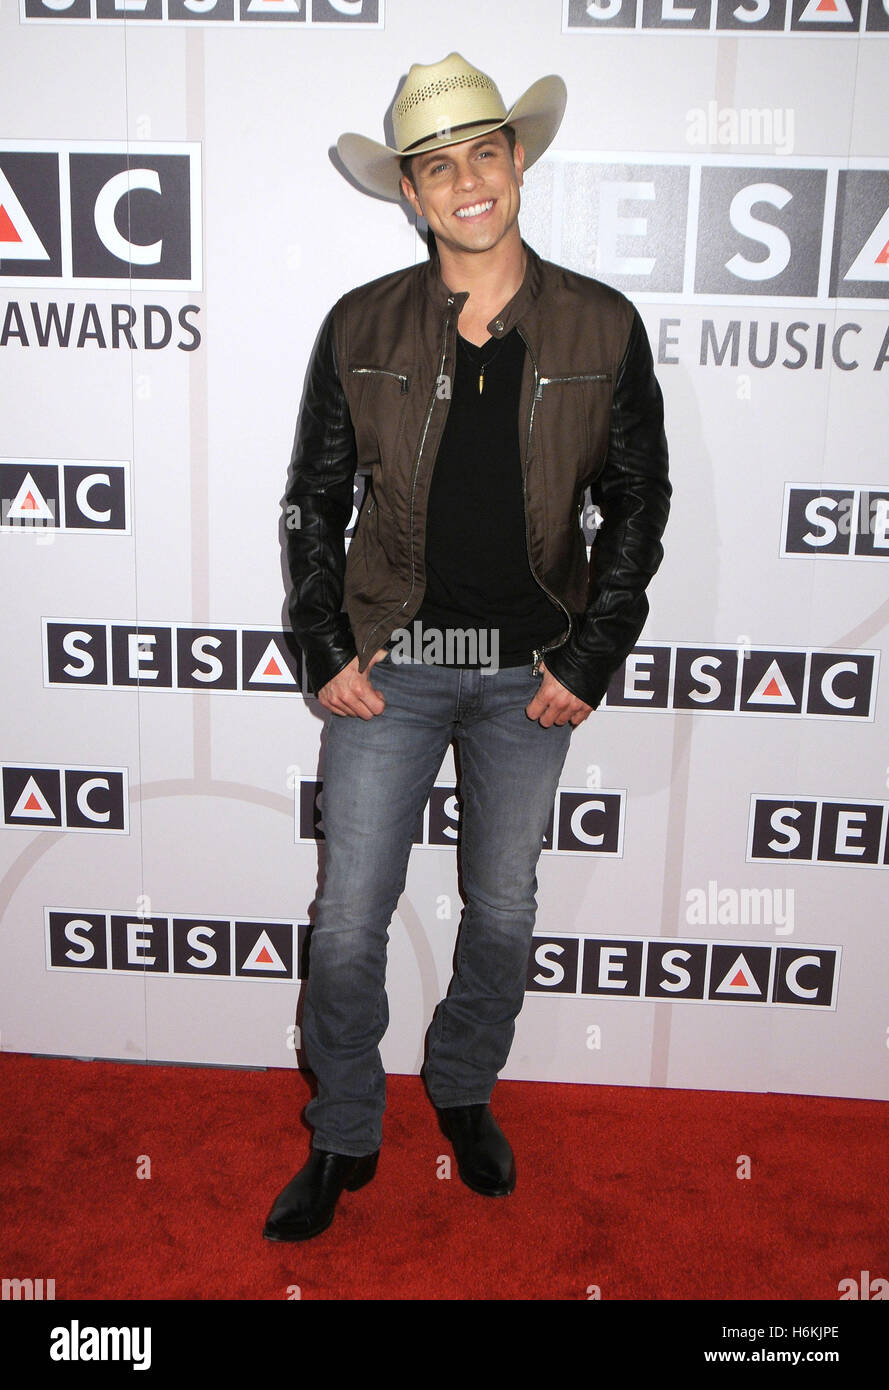 Nashville, Tennessee, USA. 6th June, 2014. 30 October 2016 - Nashville, Tennessee - Dustin Lynch. 2016 SESAC Nashville Music Awards honoring the songwriters and music publishers behind the year's most-performed Country and Americana songs held at the Country Music Hall of Fame and Museum. Photo Credit: Laura Farr/AdMedia © Laura Farr/AdMedia/ZUMA Wire/Alamy Live News Stock Photo